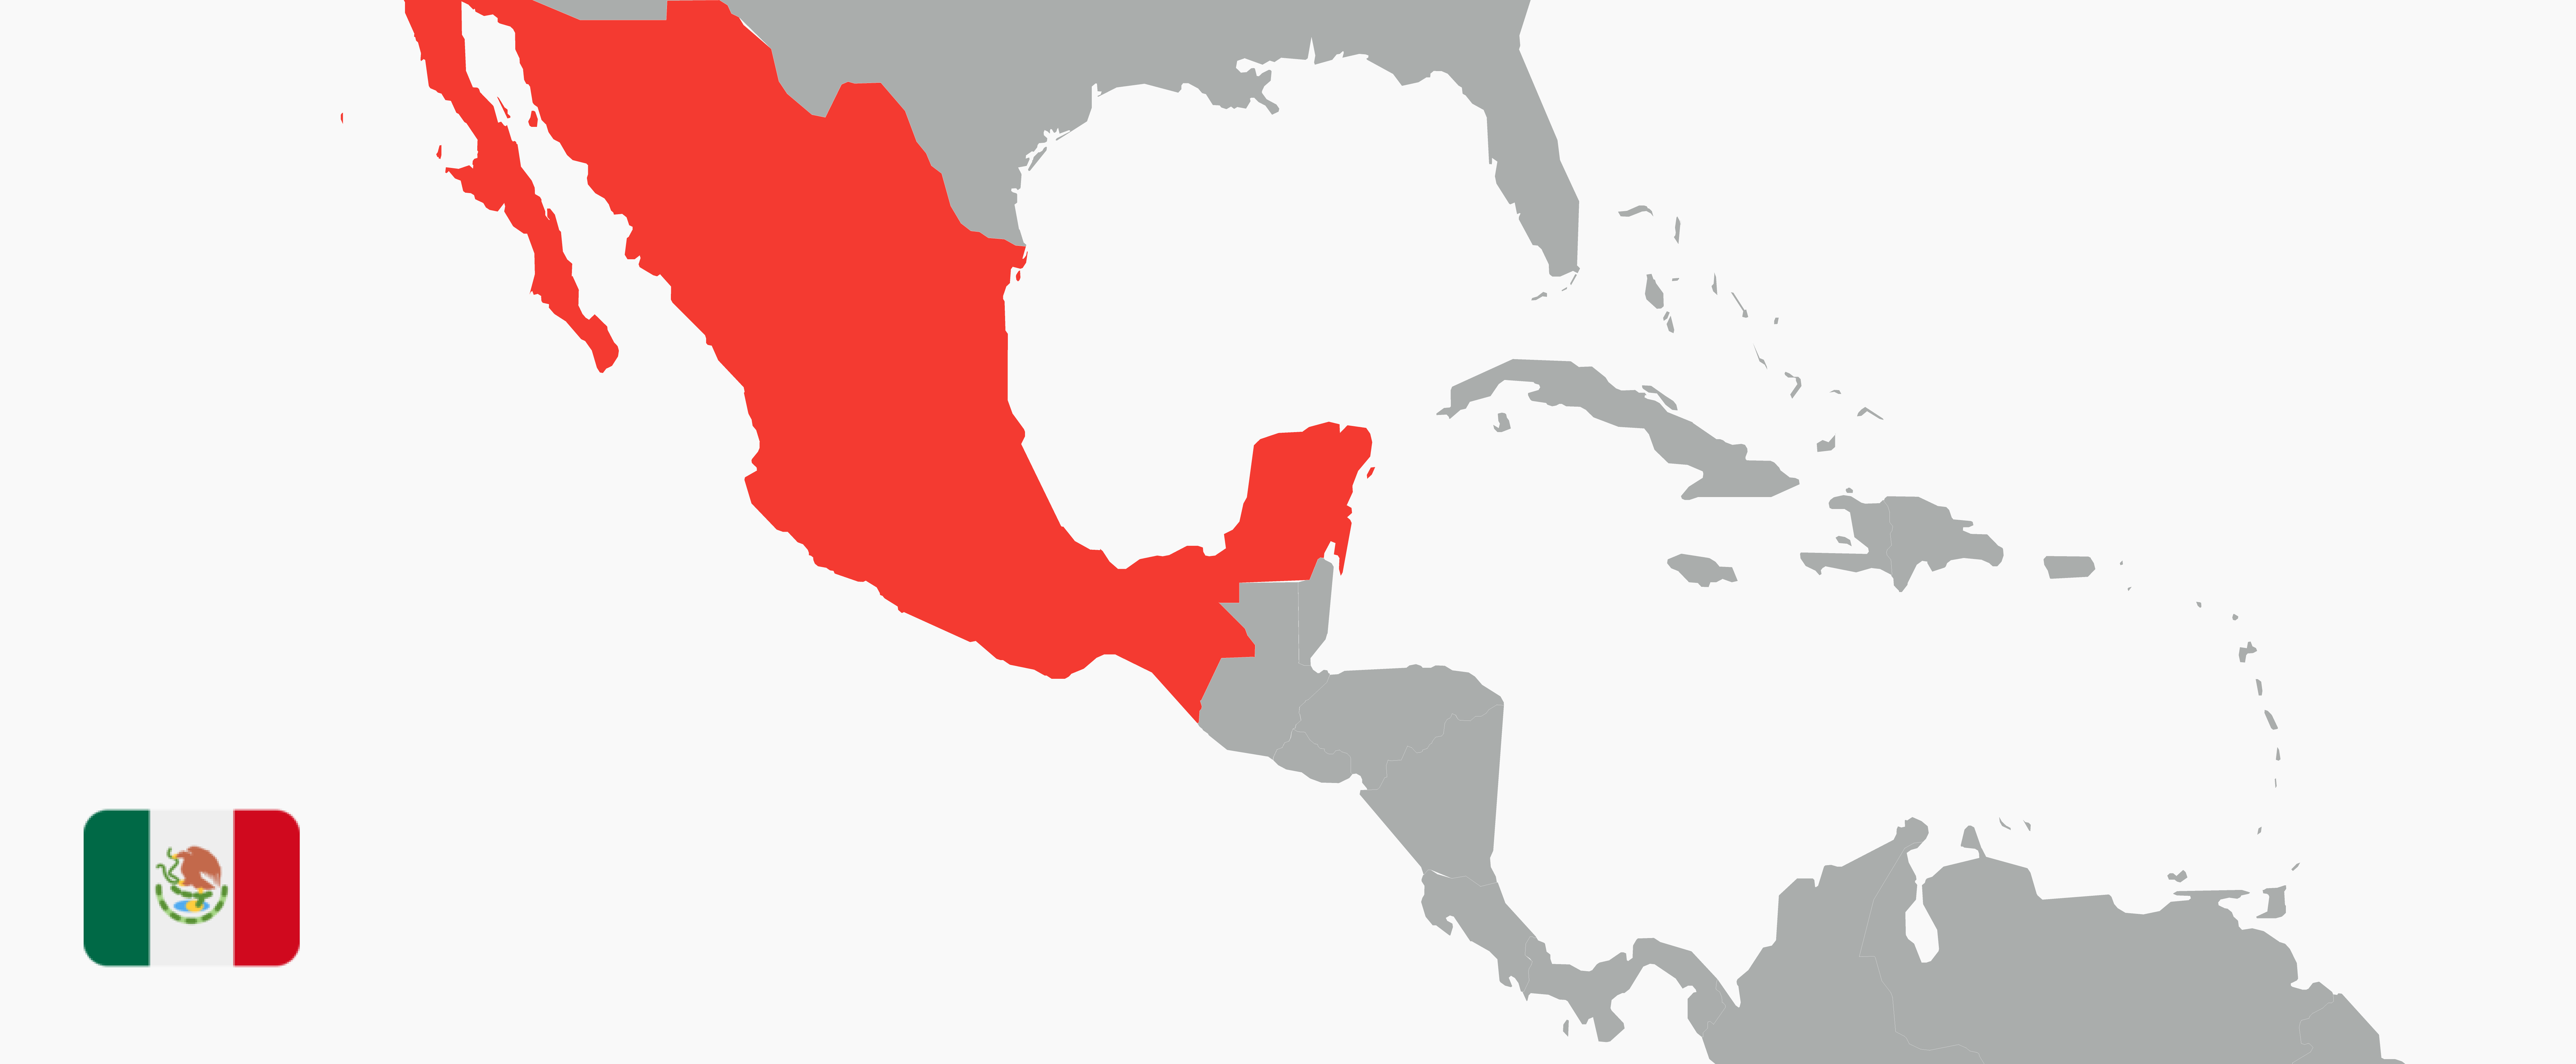 A map of Central America with Mexico highlighted in red